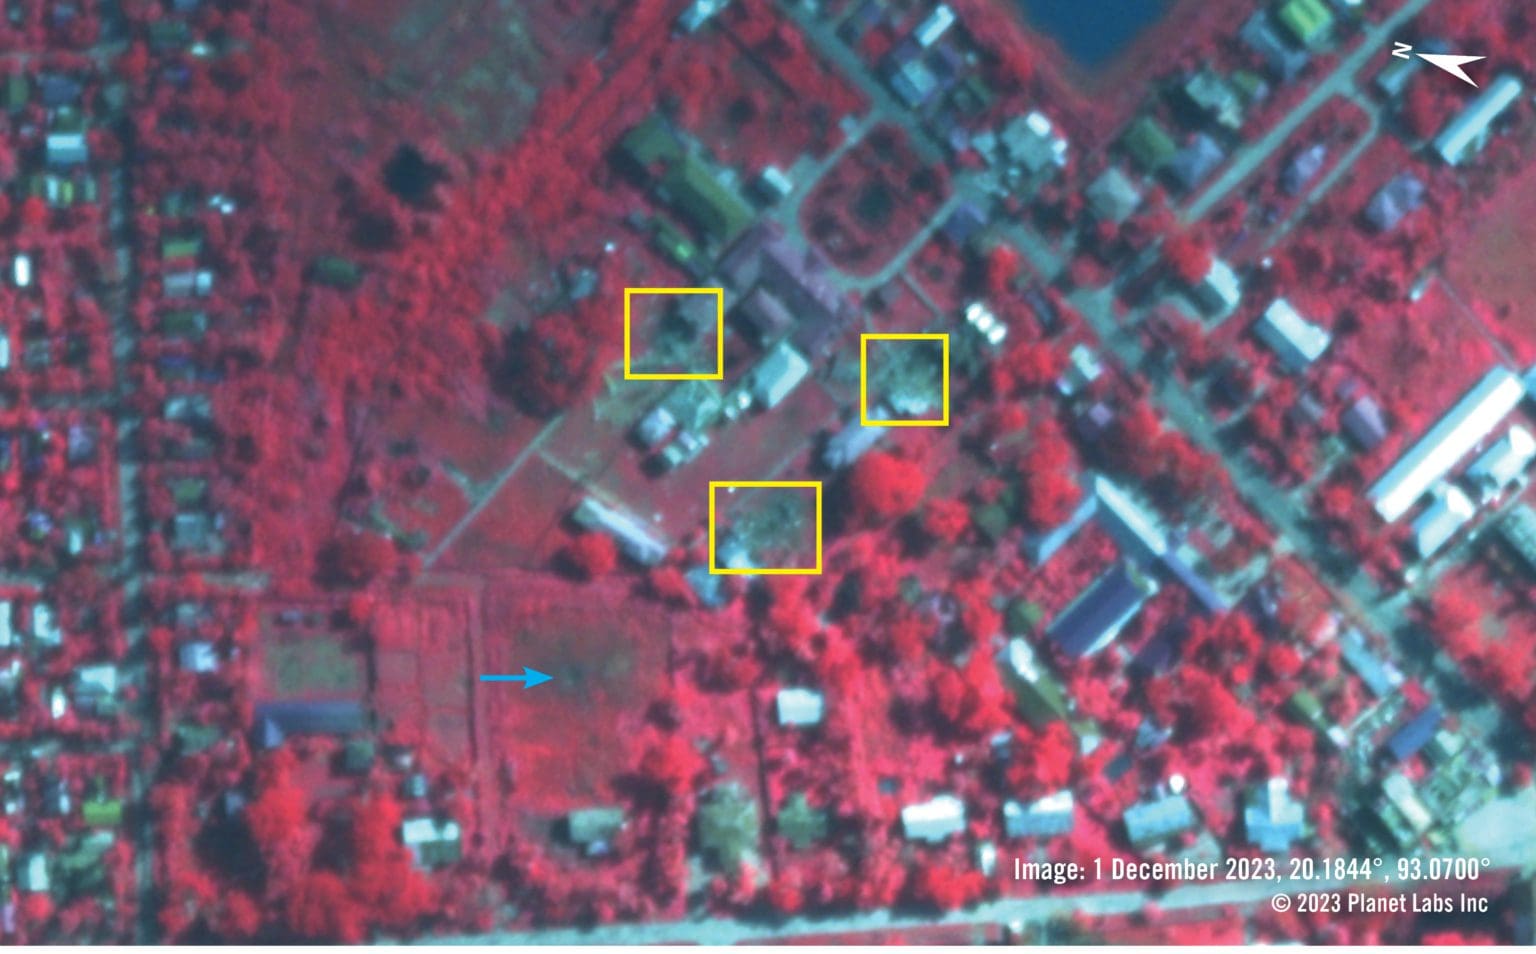 False-colour, near-infrared satellite imagery from 1 December 2023 shows the reported hospital area. Healthy vegetation appears in shades of red and unhealthy or burned vegetation appears darker shades of black and brown. The imagery shows recently damaged and destroyed structures – highlighted with yellow boxes. A large crater, with an approximately four-metre diameter, is highlighted with a blue arrow